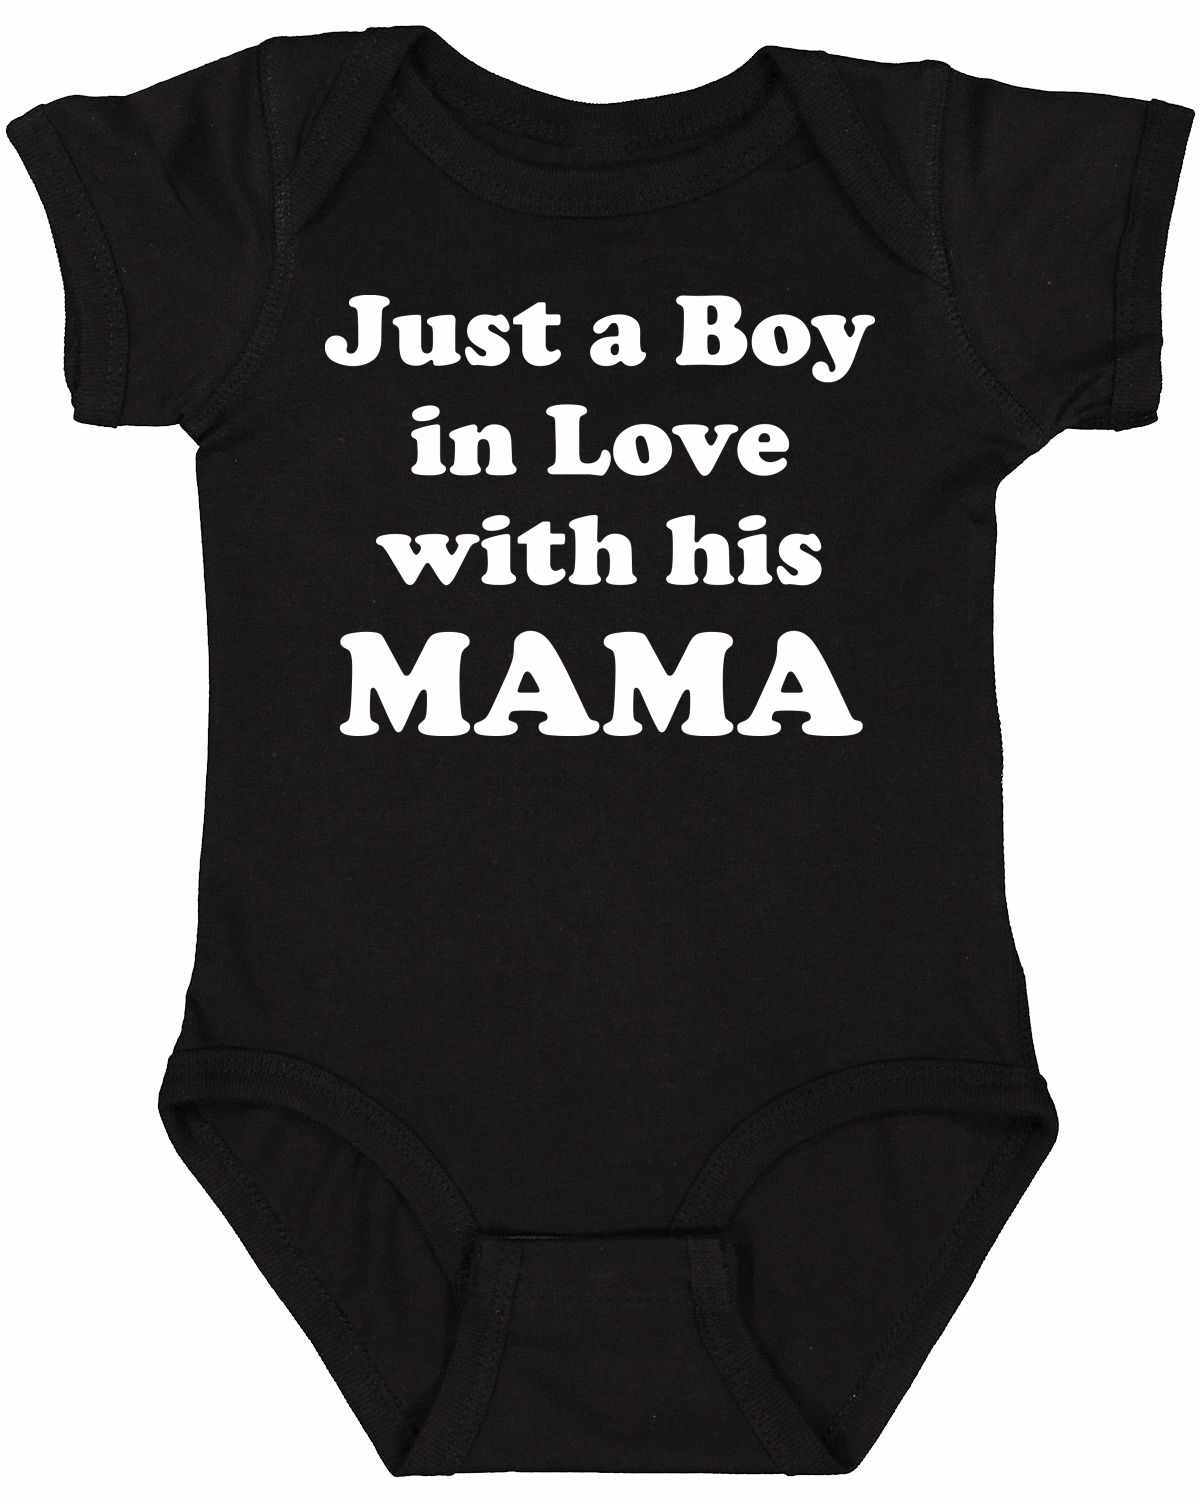 Just a Boy in Love with his MAMA Infant BodySuit